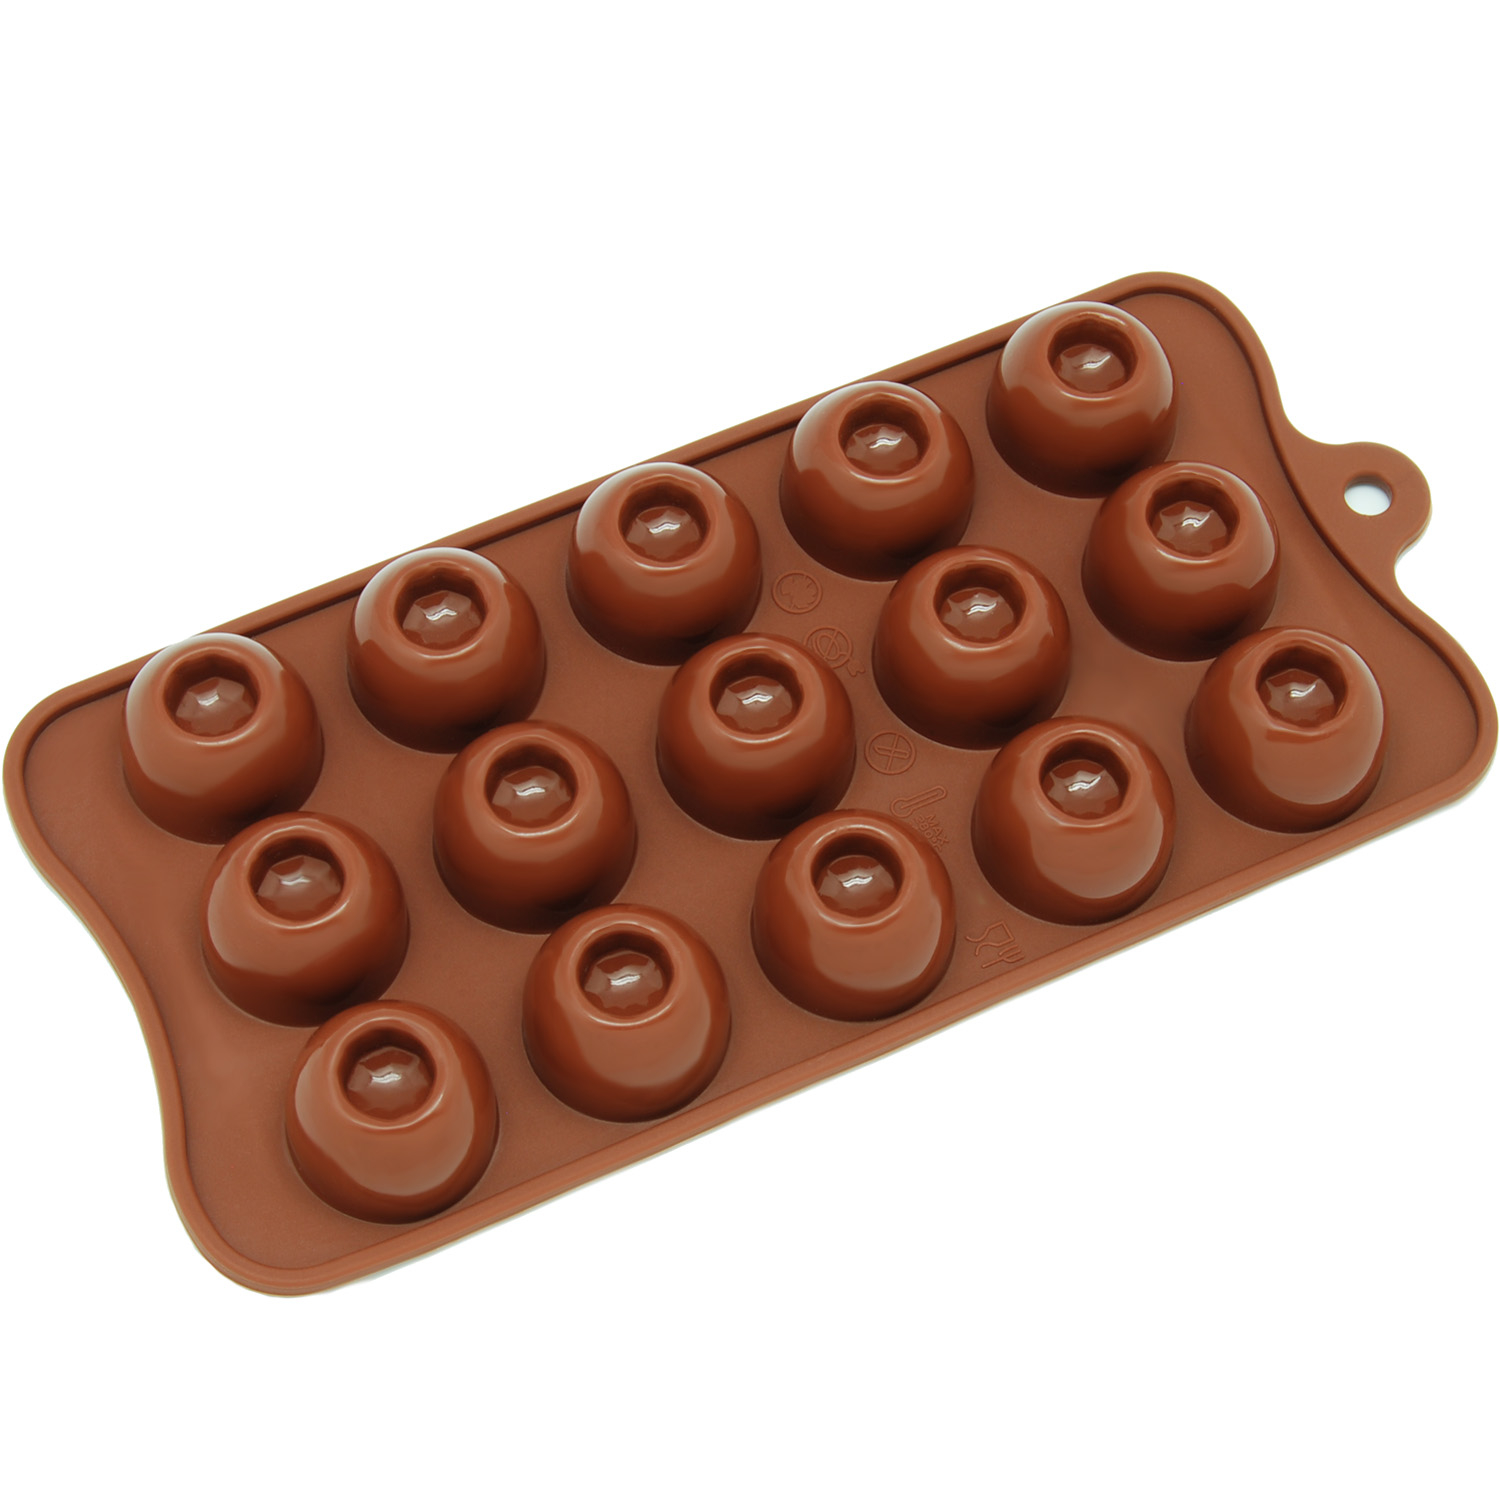 Freshware Silicone Mold, Chocolate Mold, Candy Mold, Ice Mold, Soap Mold for Chocolate, Candy and Gummy, Dimpled Round, 15-Cavity